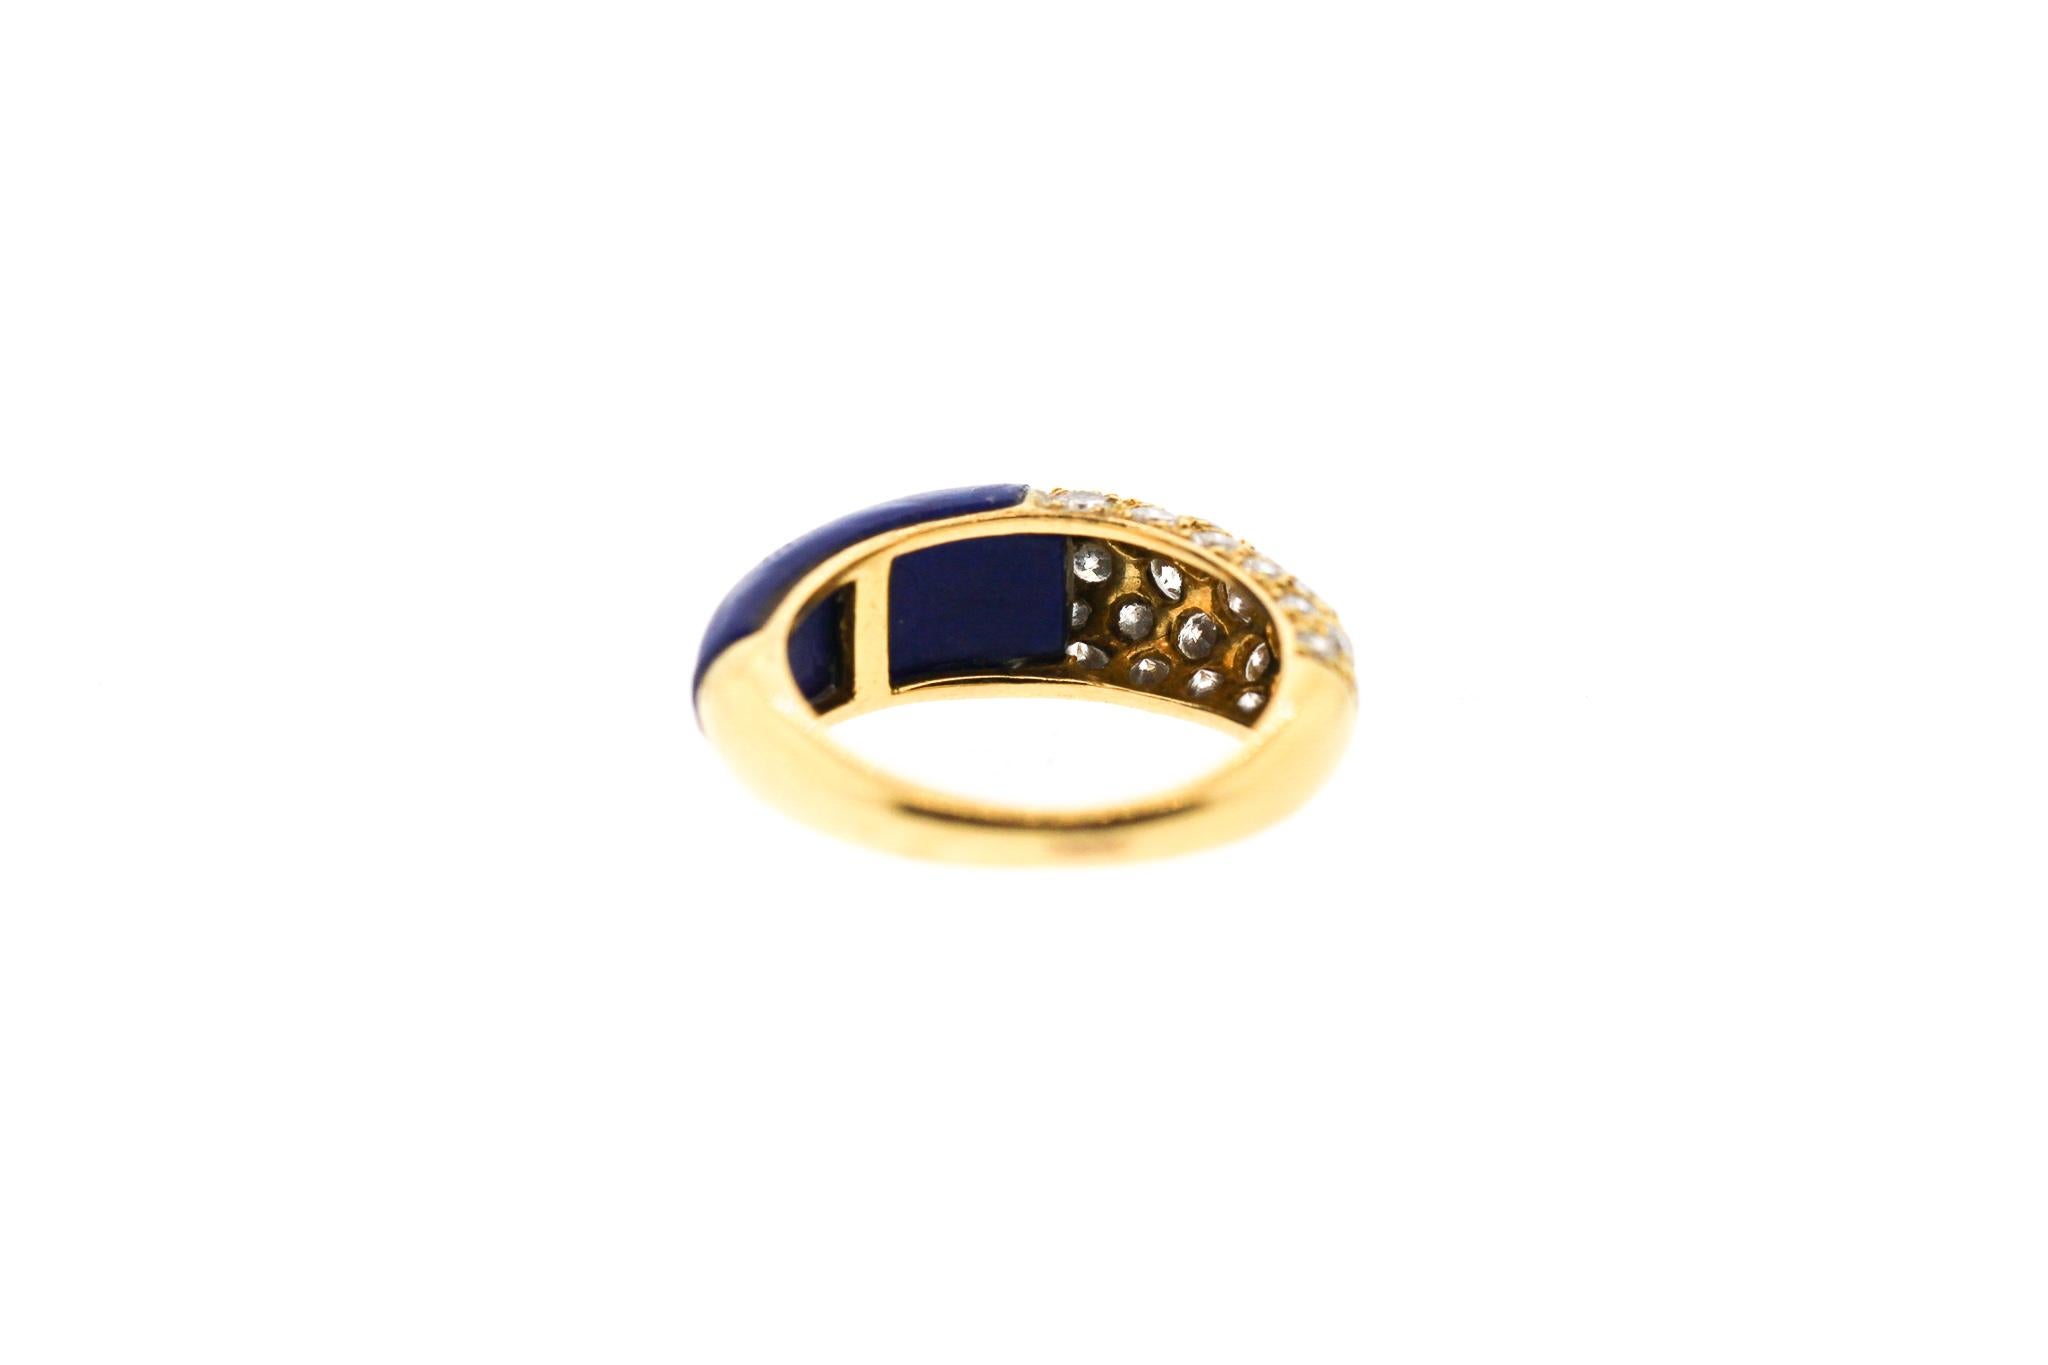  Cartier 18 Karat Gold Lapis Diamond Band Ring In Good Condition For Sale In New York, NY